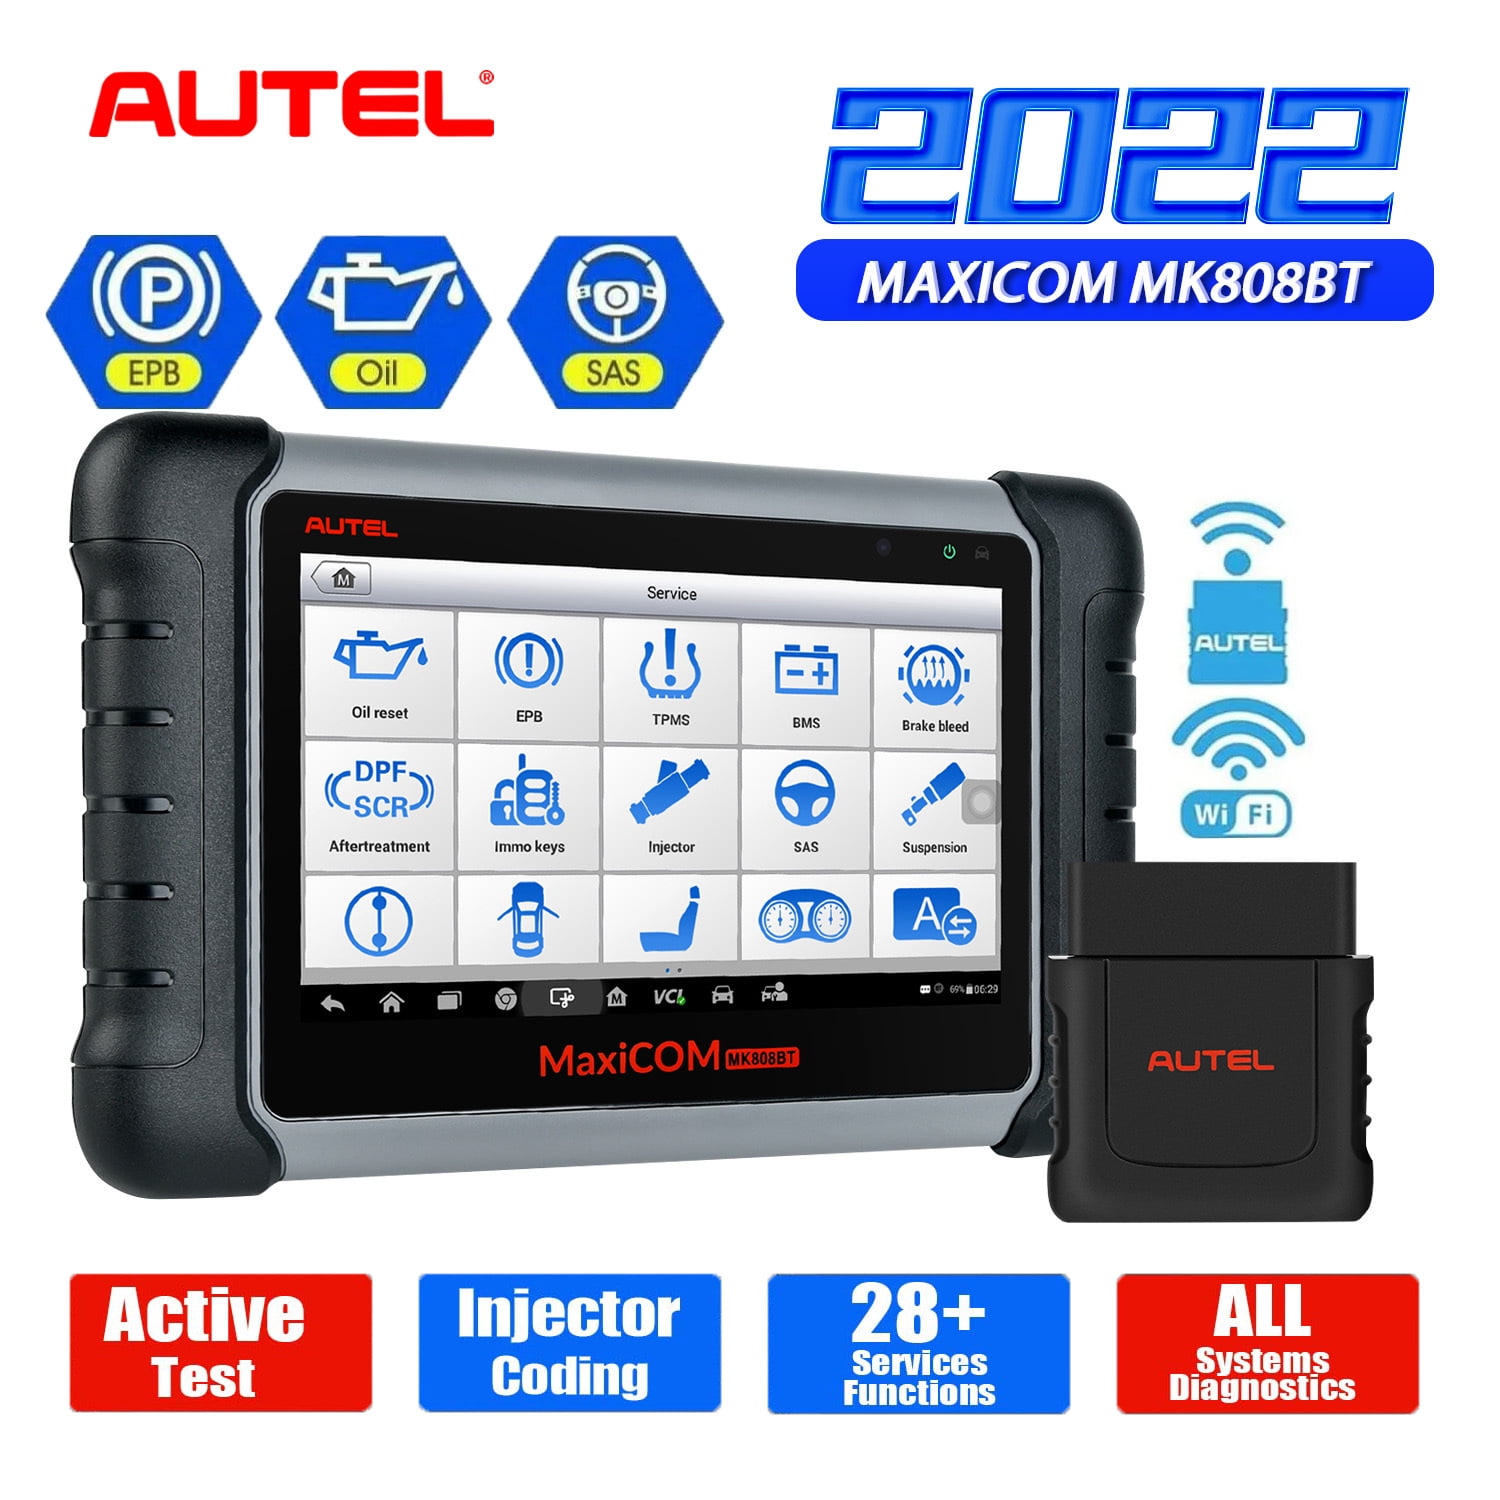 Upgraded Version of MK808 Bi-Directional Control ABS Auto Bleed Function with MaxiVCI Supports Full System Scan & IMMO/EPB/SAS/BMS/TPMS/DPF Autel Scanner MaxiCOM MK808BT Diagnostic Tool 